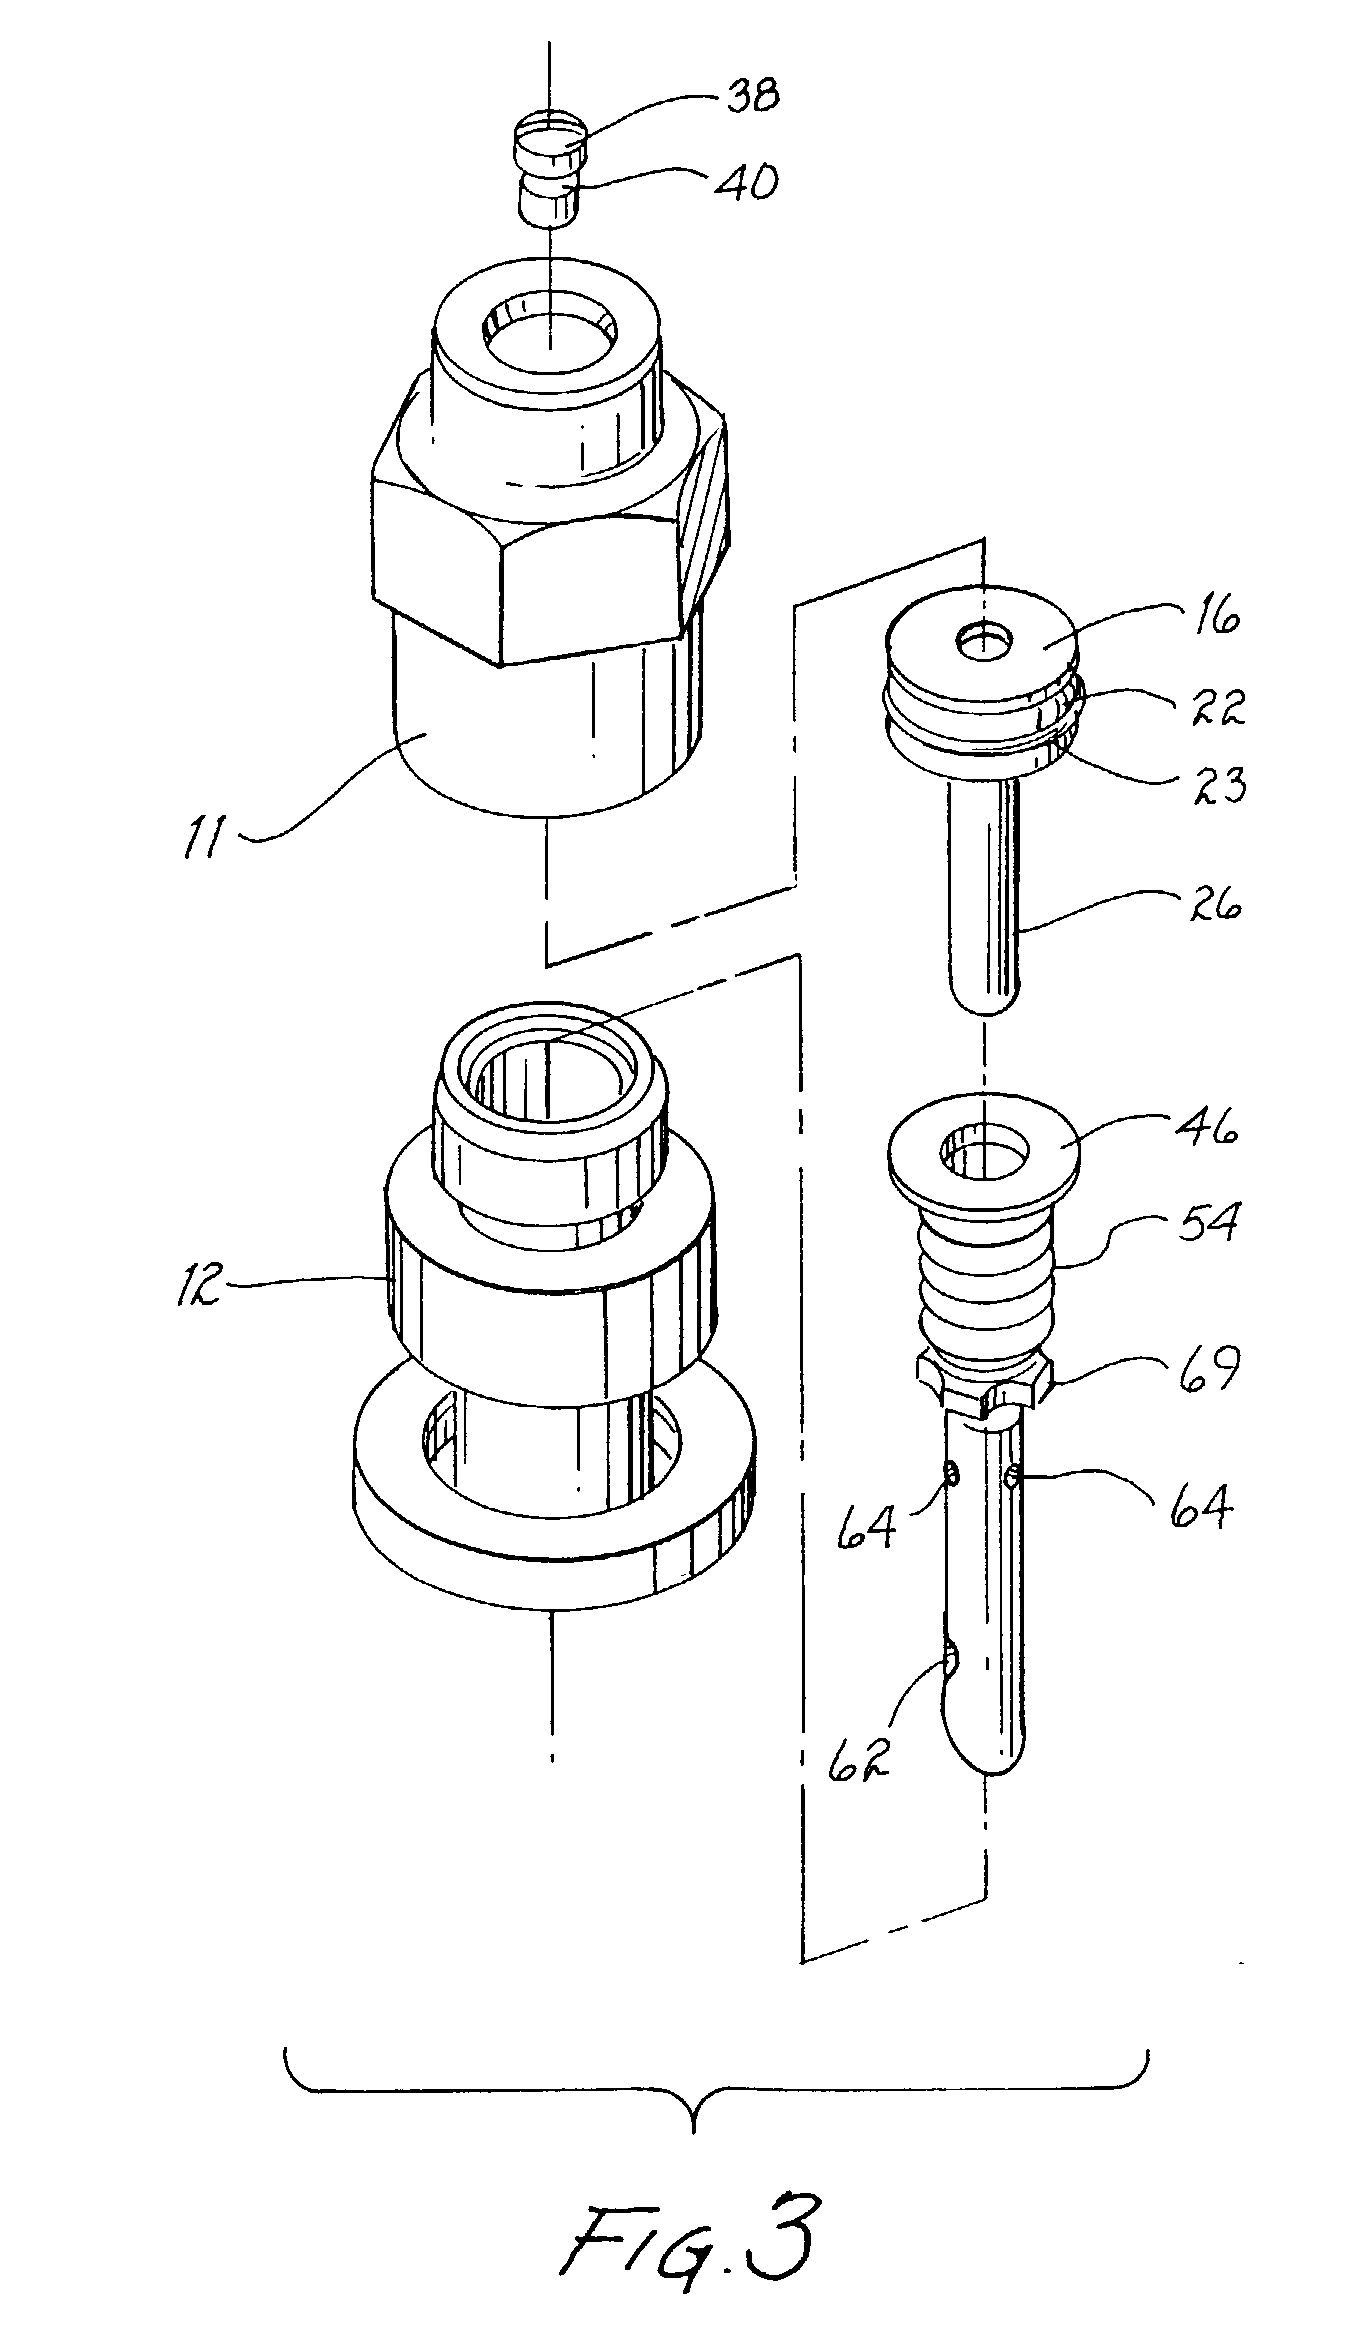 Hermetically sealed actuator